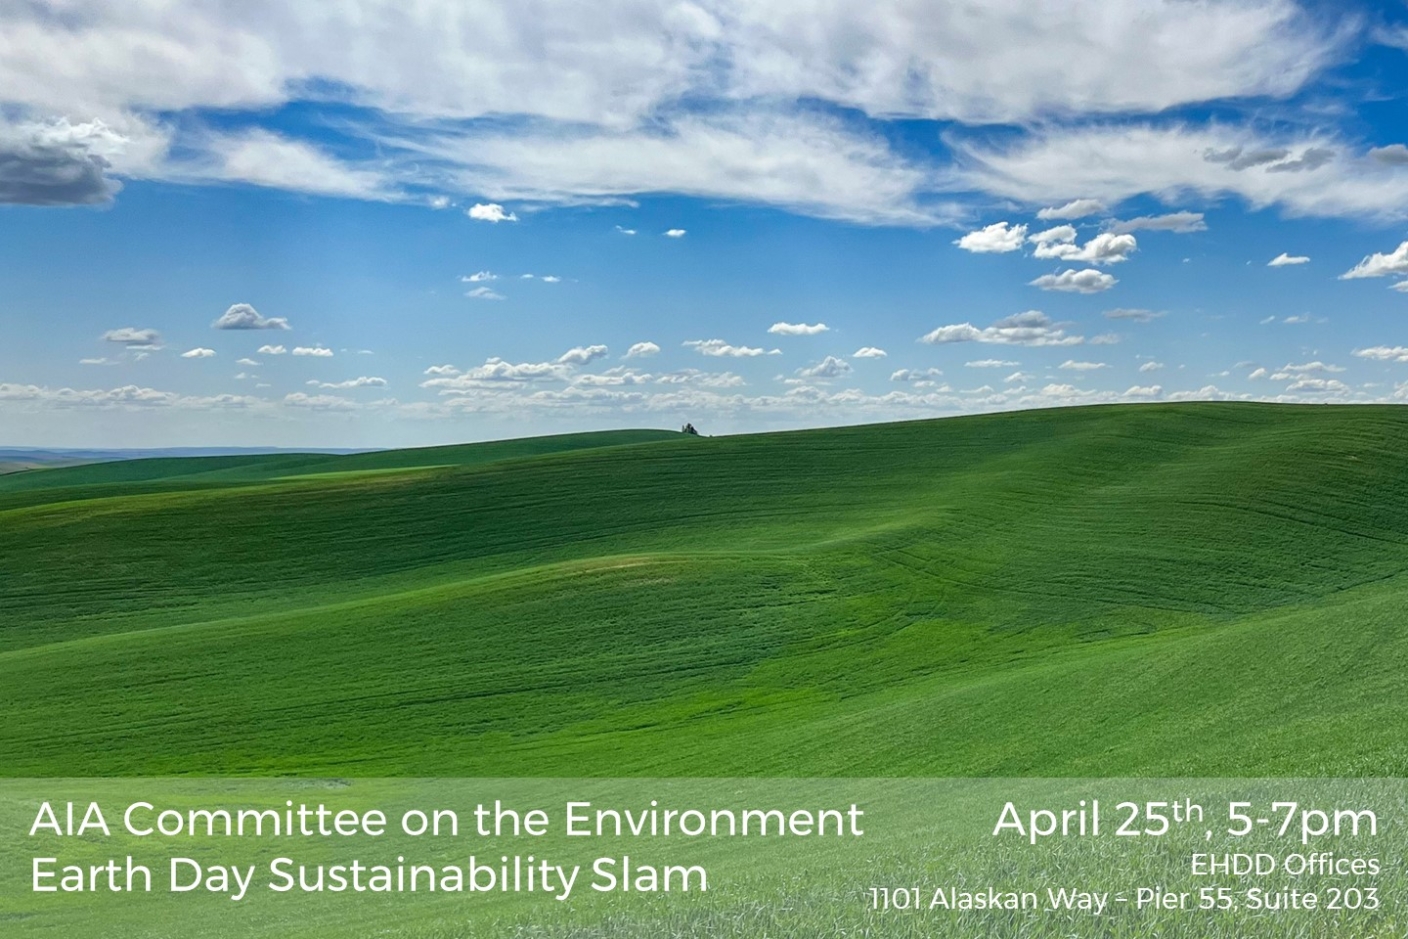 The annual Sustainability Slam is back! This Earth Week, join the Committee on the Environment (COTE) for an evening of PechaKucha presentations on all things sustainability over snacks and drinks. Submit your presentation ideas below!